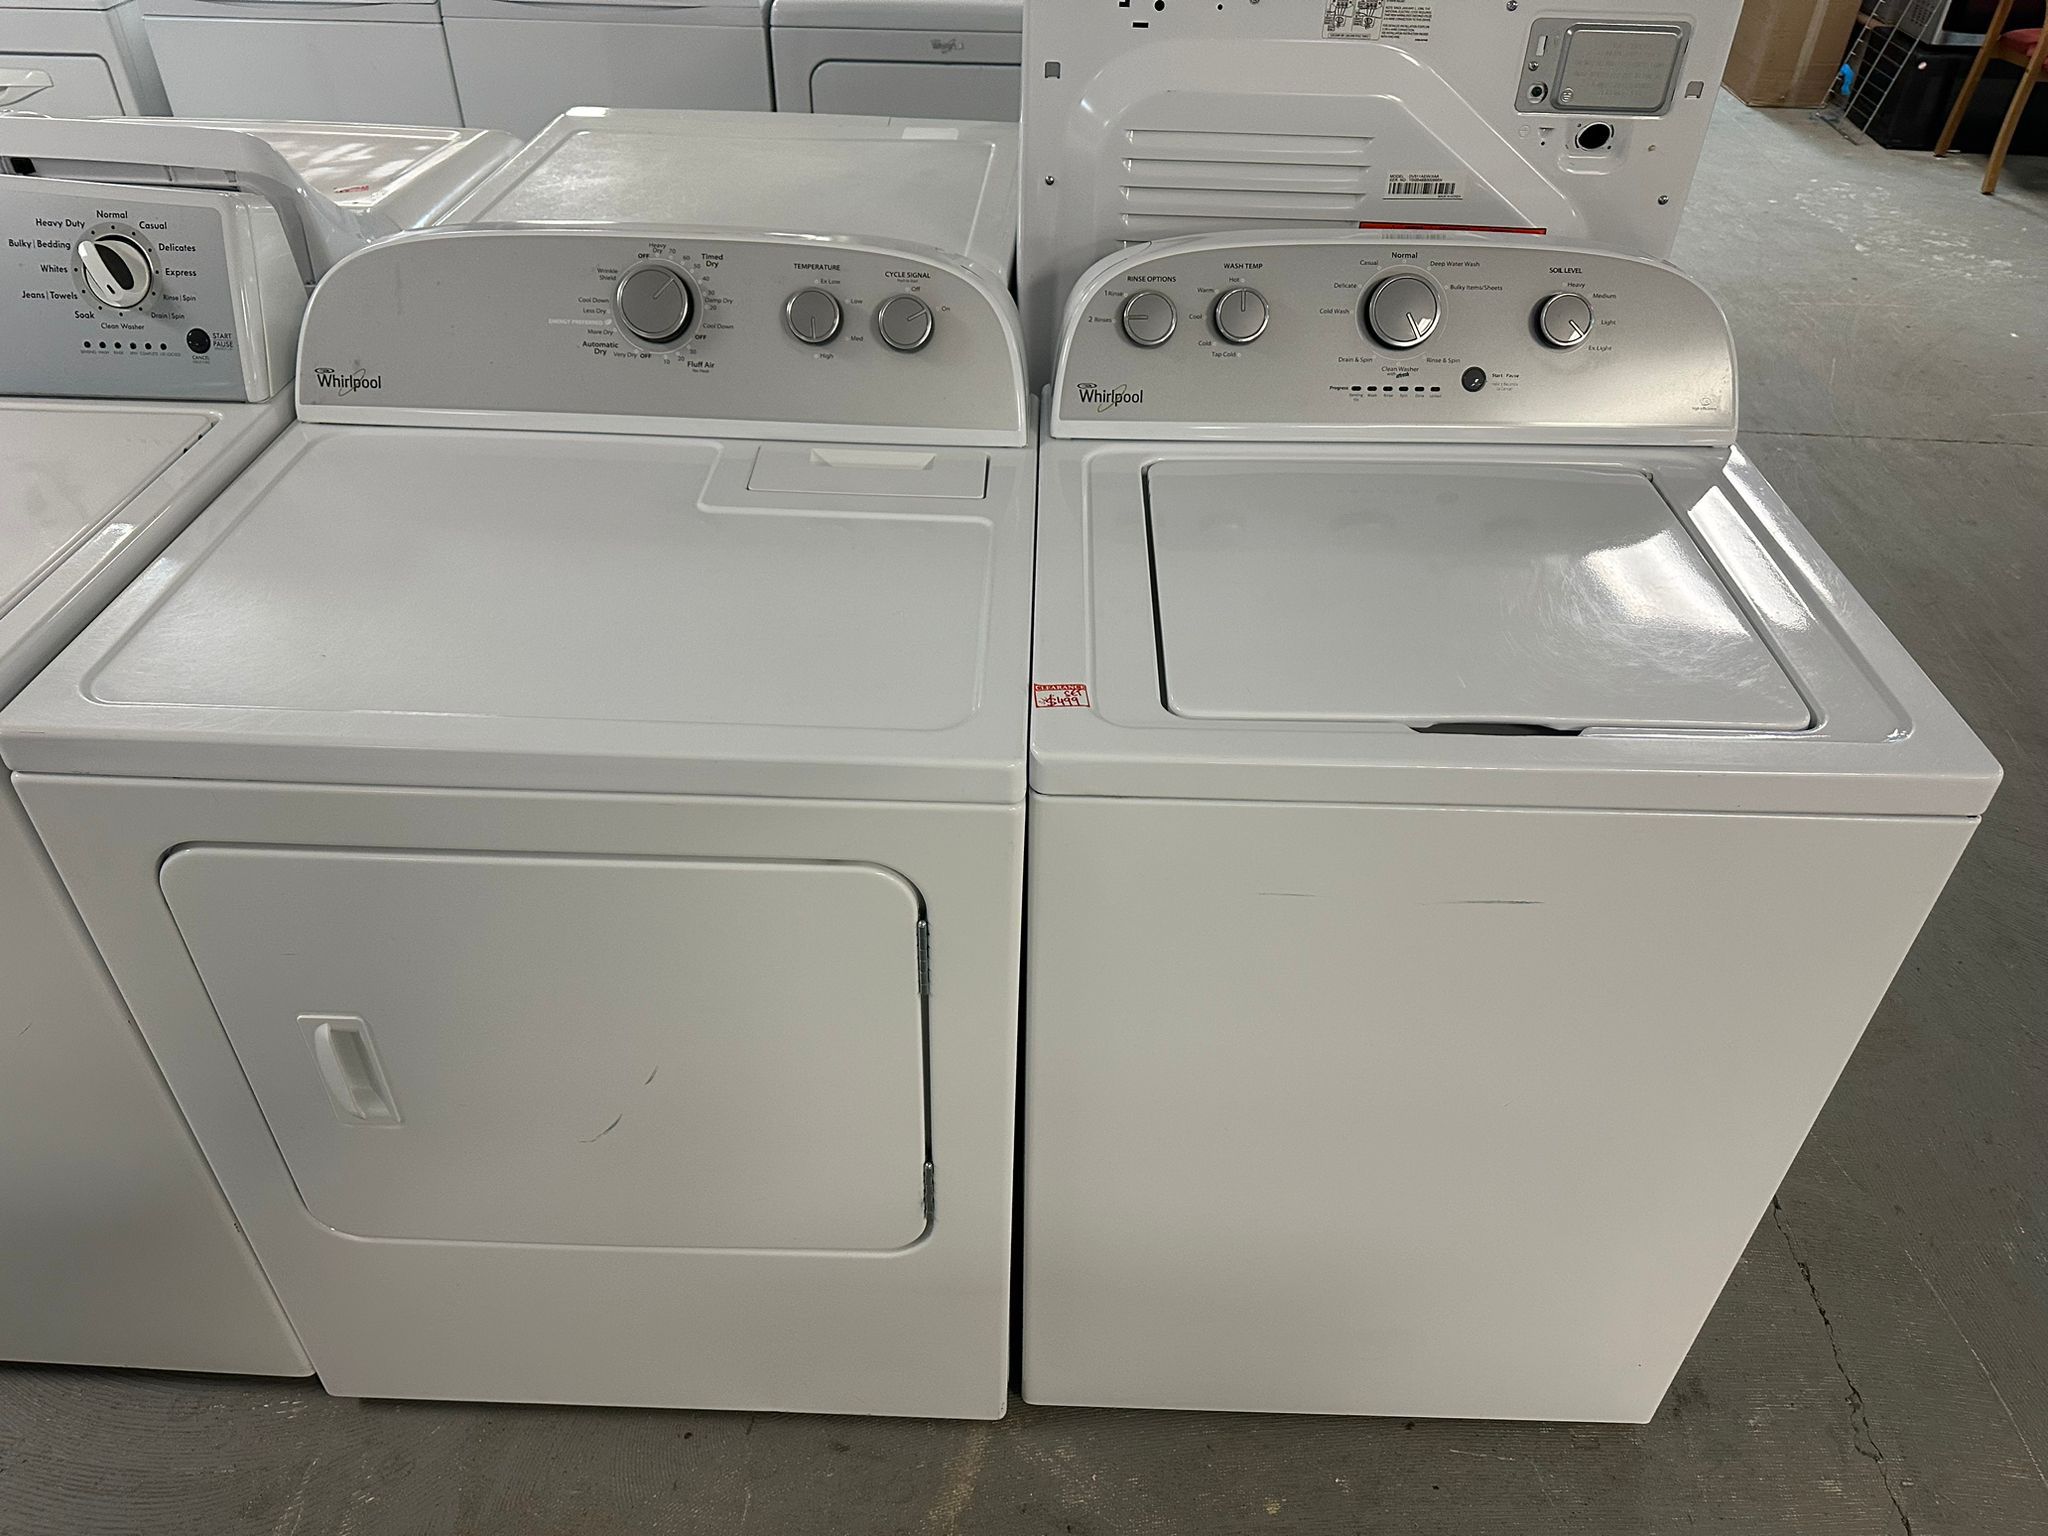 WHIRLPOOL USED TOP LOAD WASHER DRYER SET WITH WARRANTY